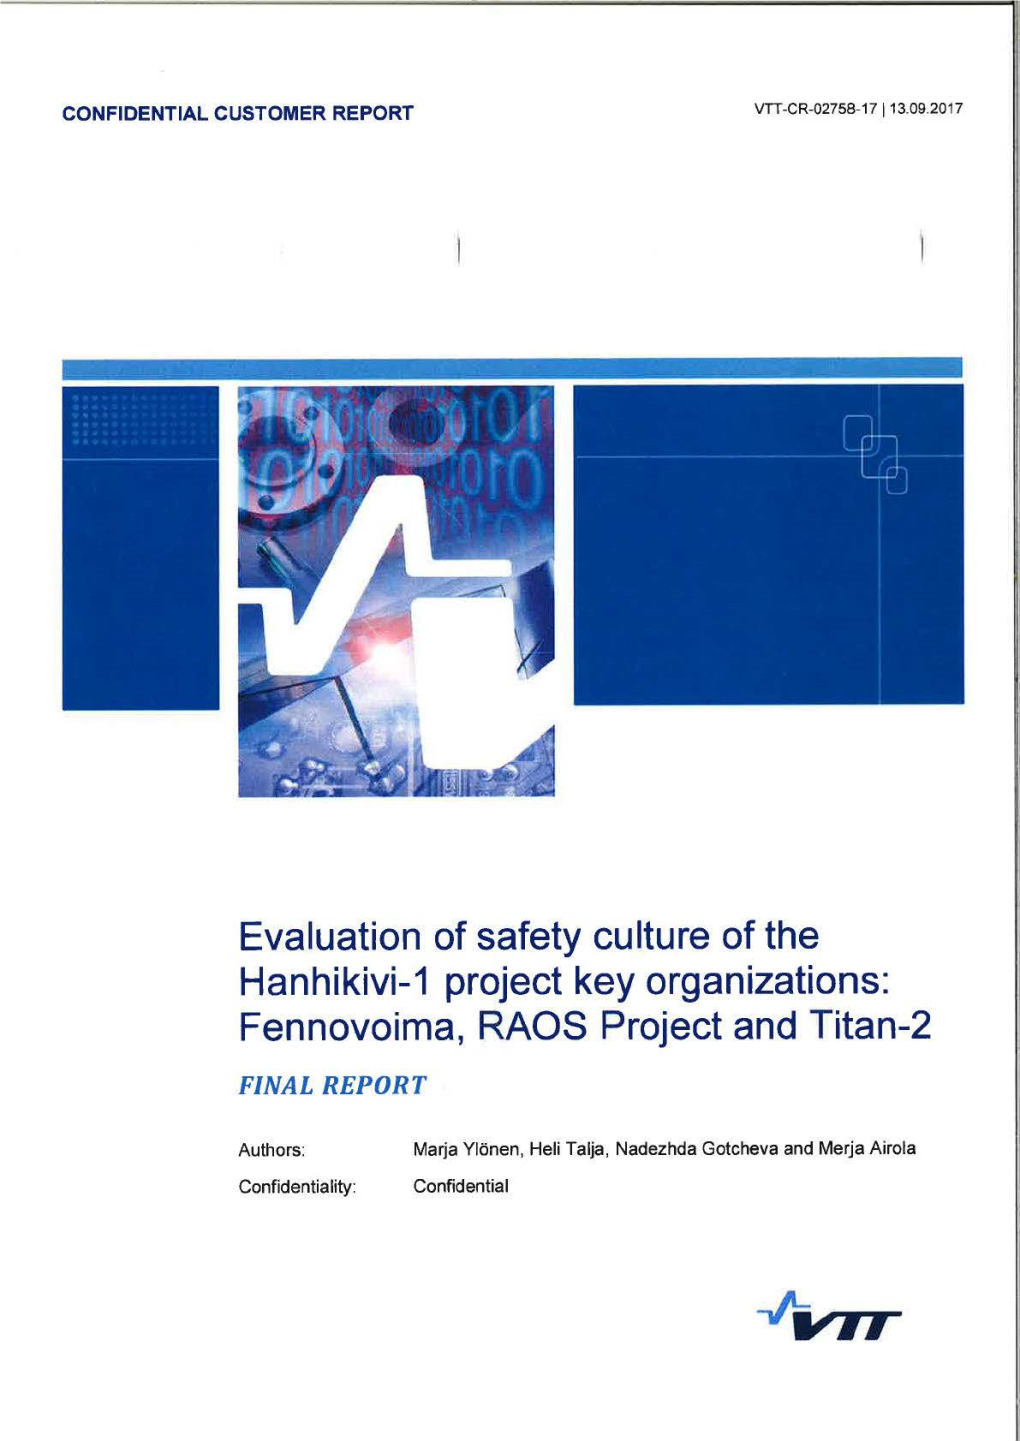 Evaluation of Safety Culture of the Hanhikivi-1 Project Key Organizations: Fennovoima, RAOS Project and Titan-2